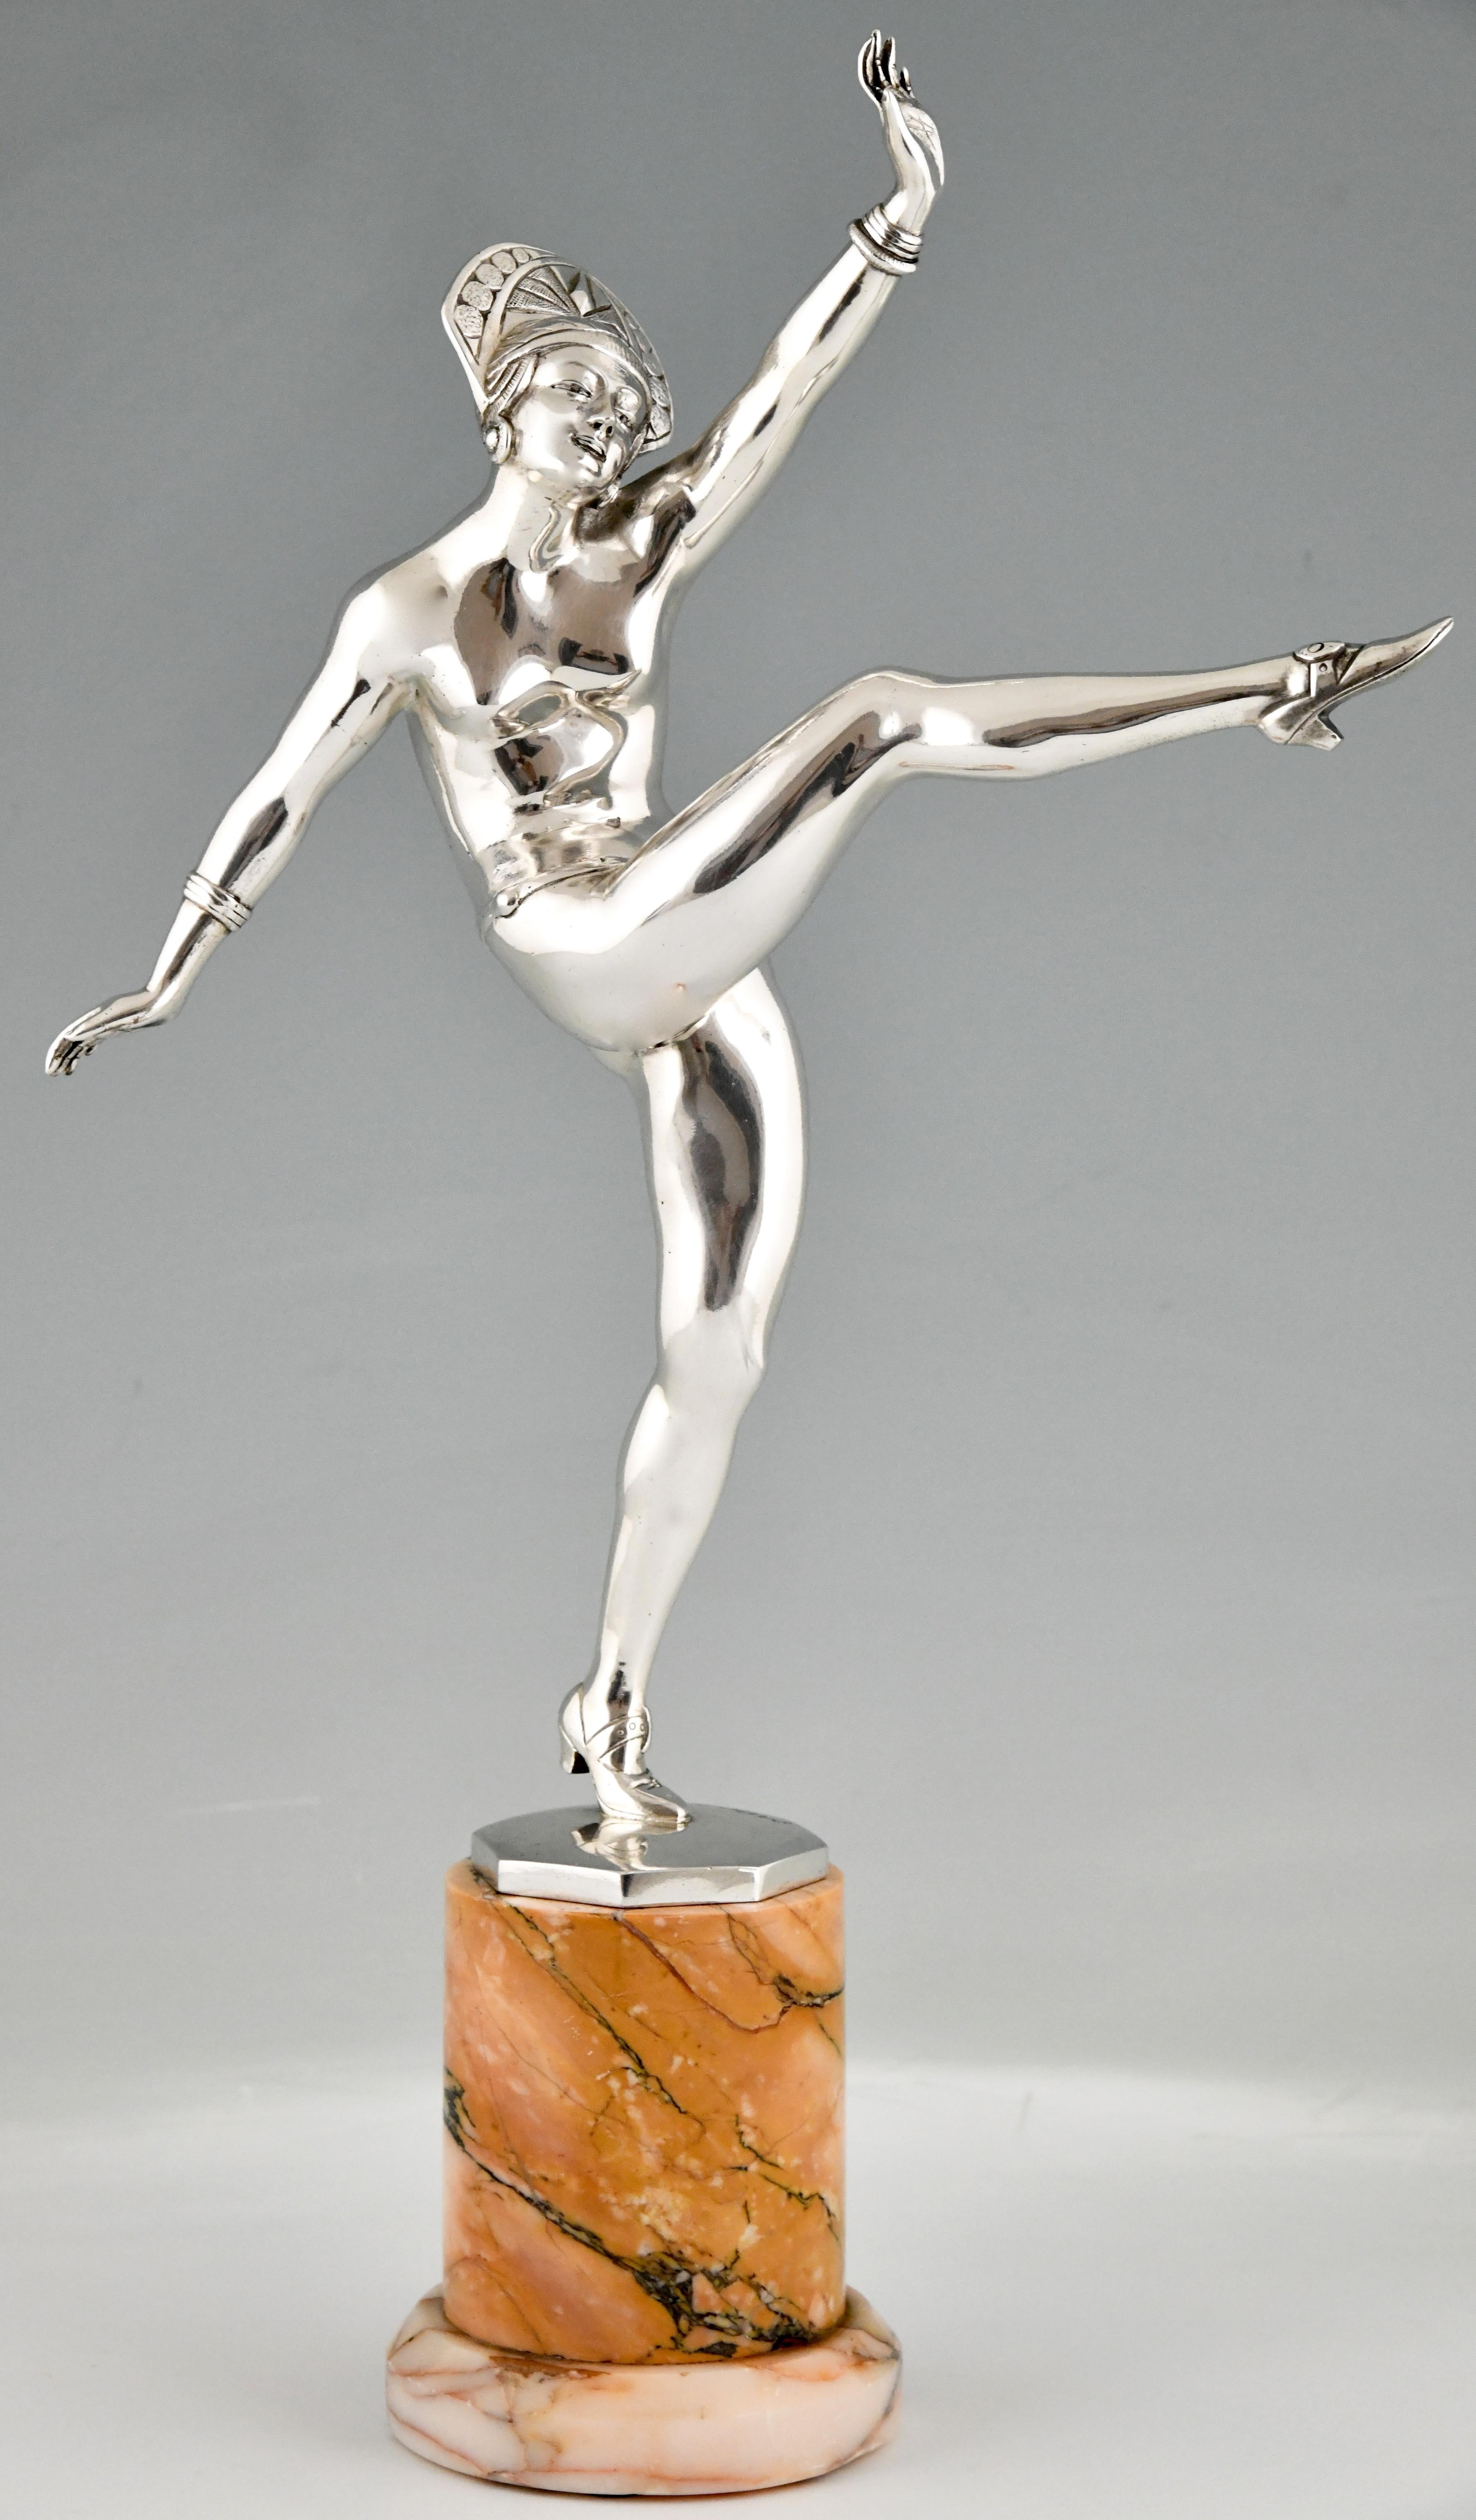 Art Deco silvered bronze sculpture nude dancer.
High Kicker by J. P. Morante.
Silvered bronze on a circular marble base.
France 1925.
This model is illustrated in:
Bronzes, sculptors and founders by H. Berman, Abage.
Art deco and other figures